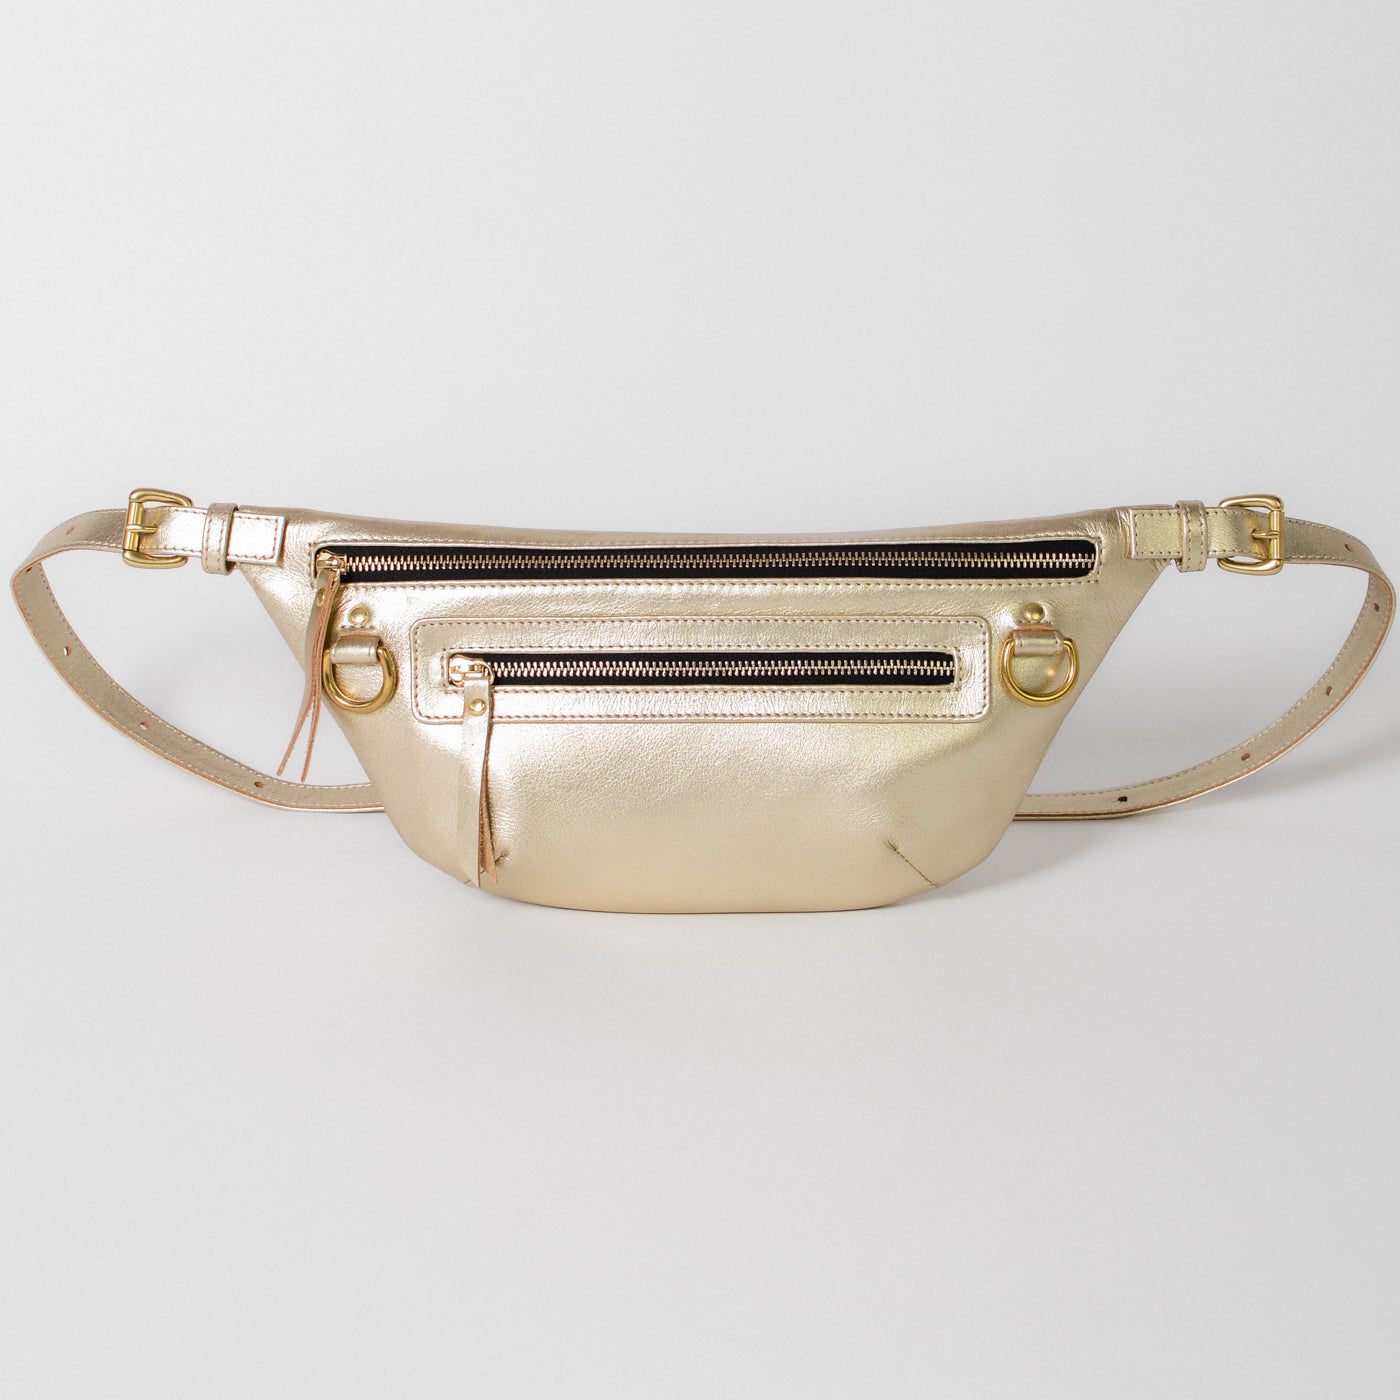 Nomad Fanny Pack in Metallic Gold